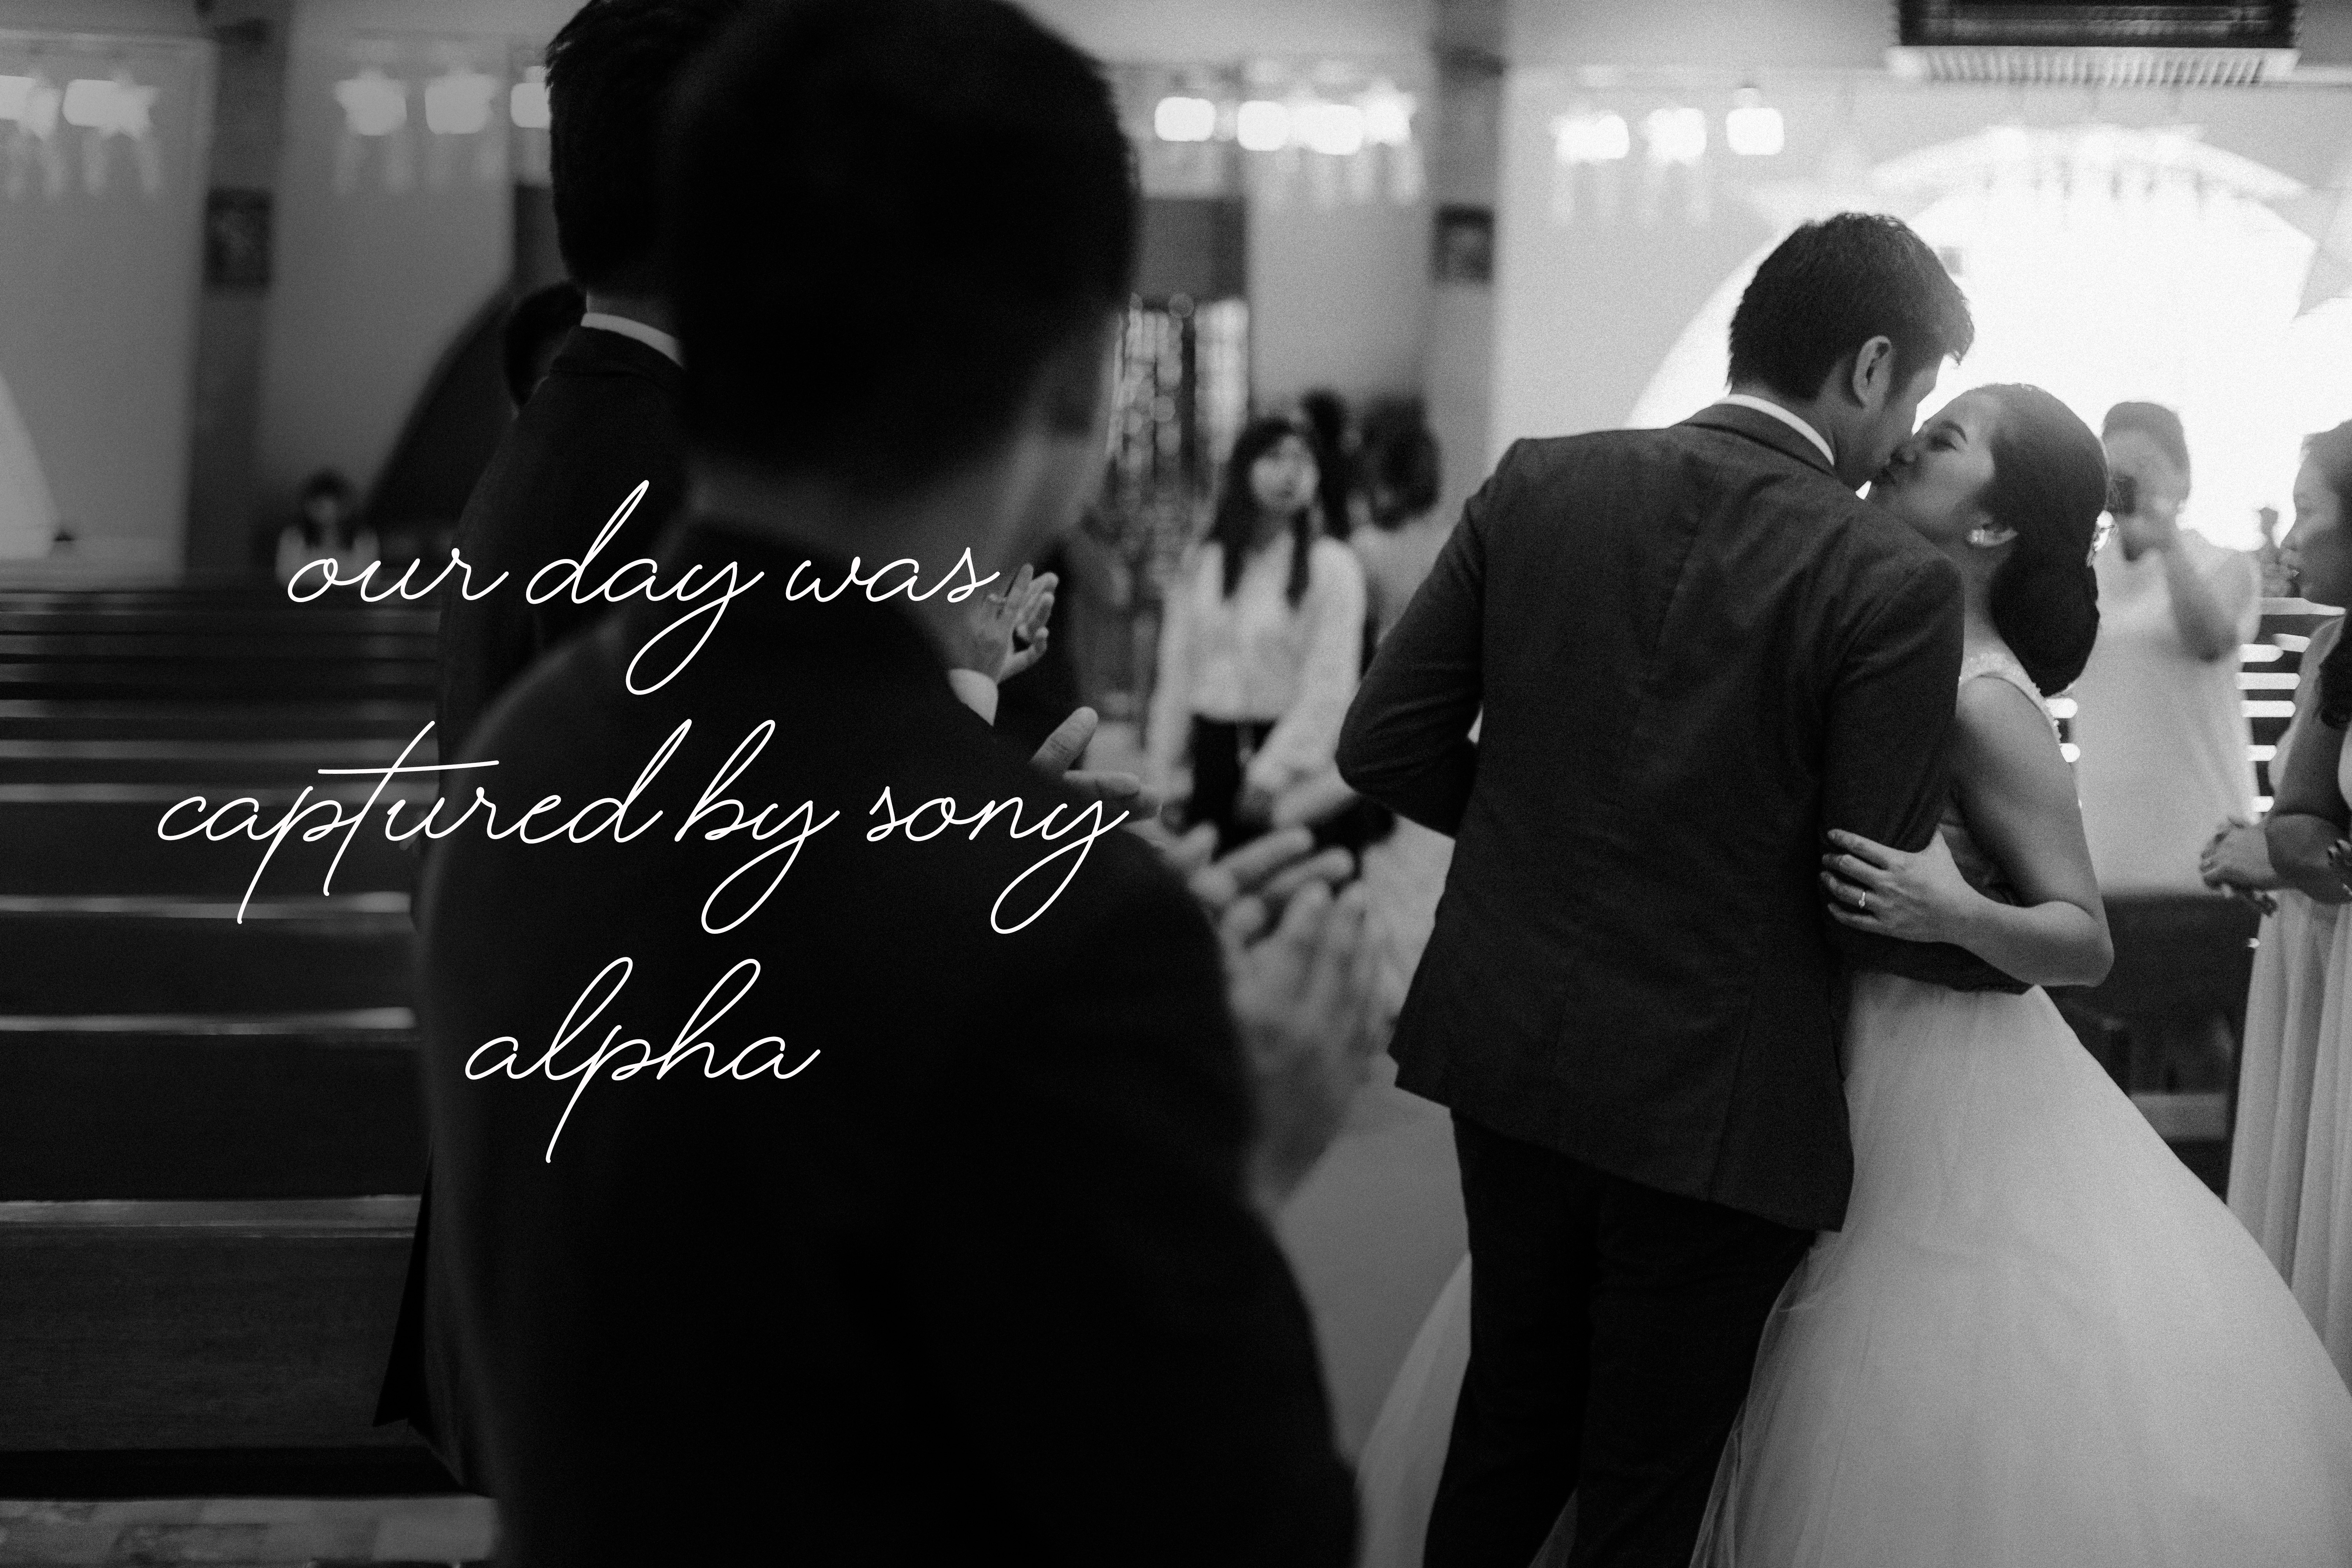 OUR DAY WAS CAPTURED BY SONY ALPHA